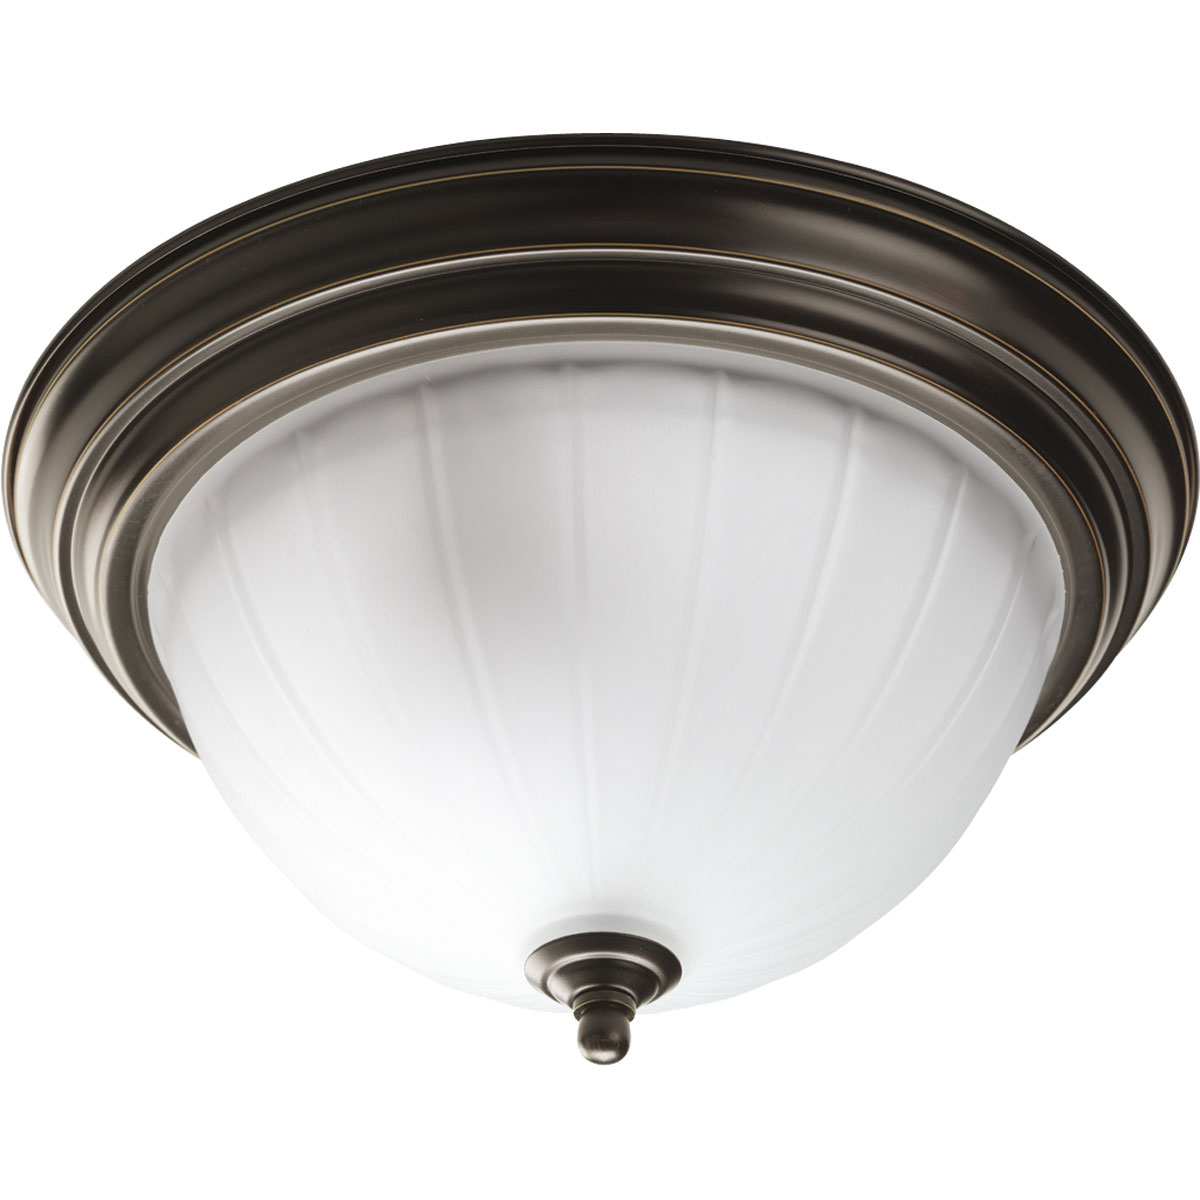 Two-light close-to-ceiling with etched ribbed melon glass with center lock up in Antique Bronze finish.